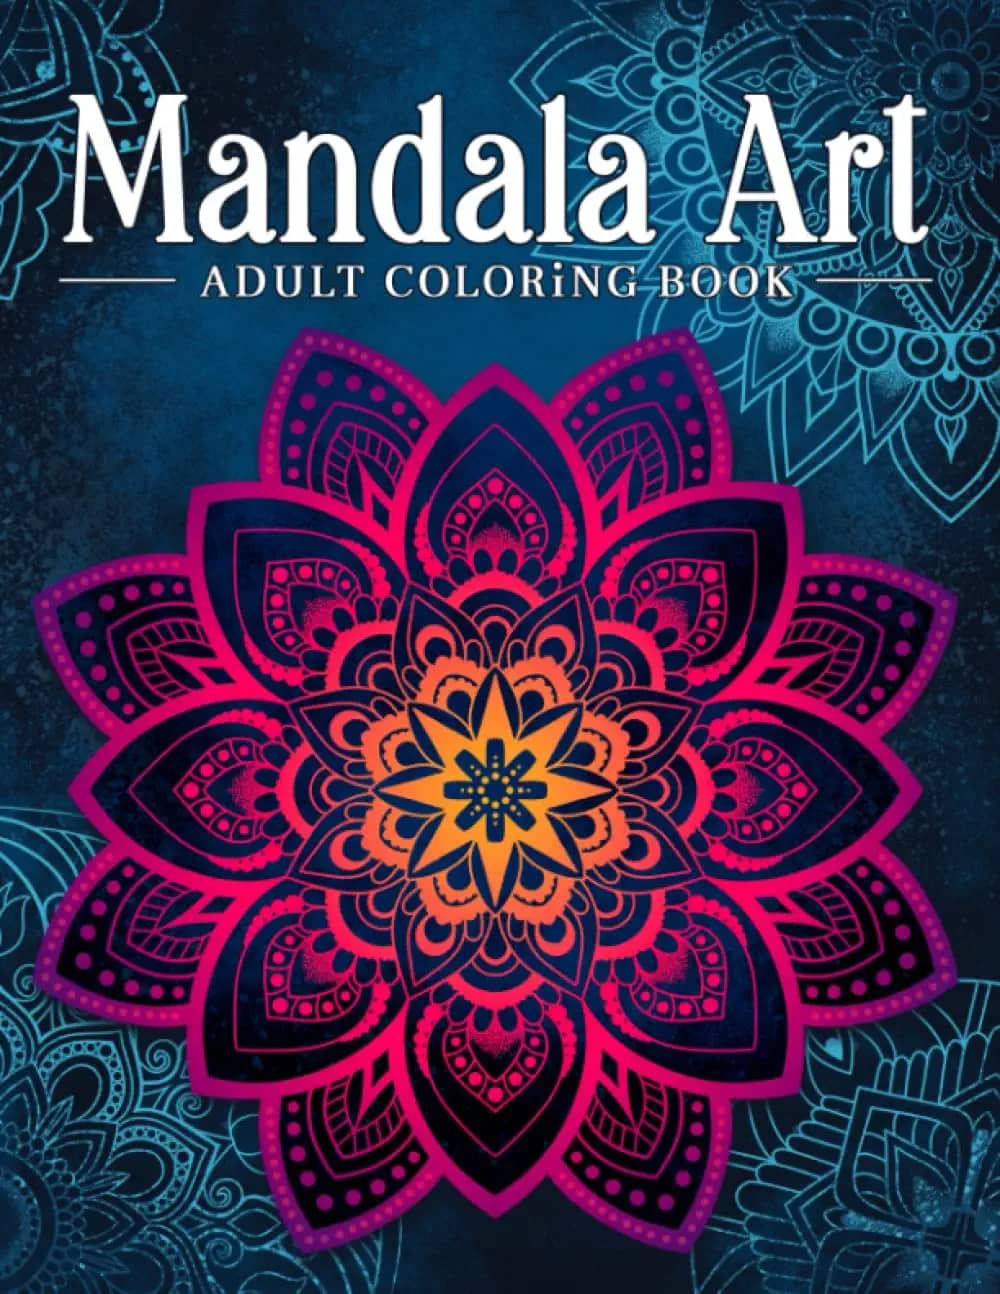 150 Mandalas: An Adult Coloring Book with 150 Beautiful Mandalas in Various  Styles for Stress Relief and Relaxation